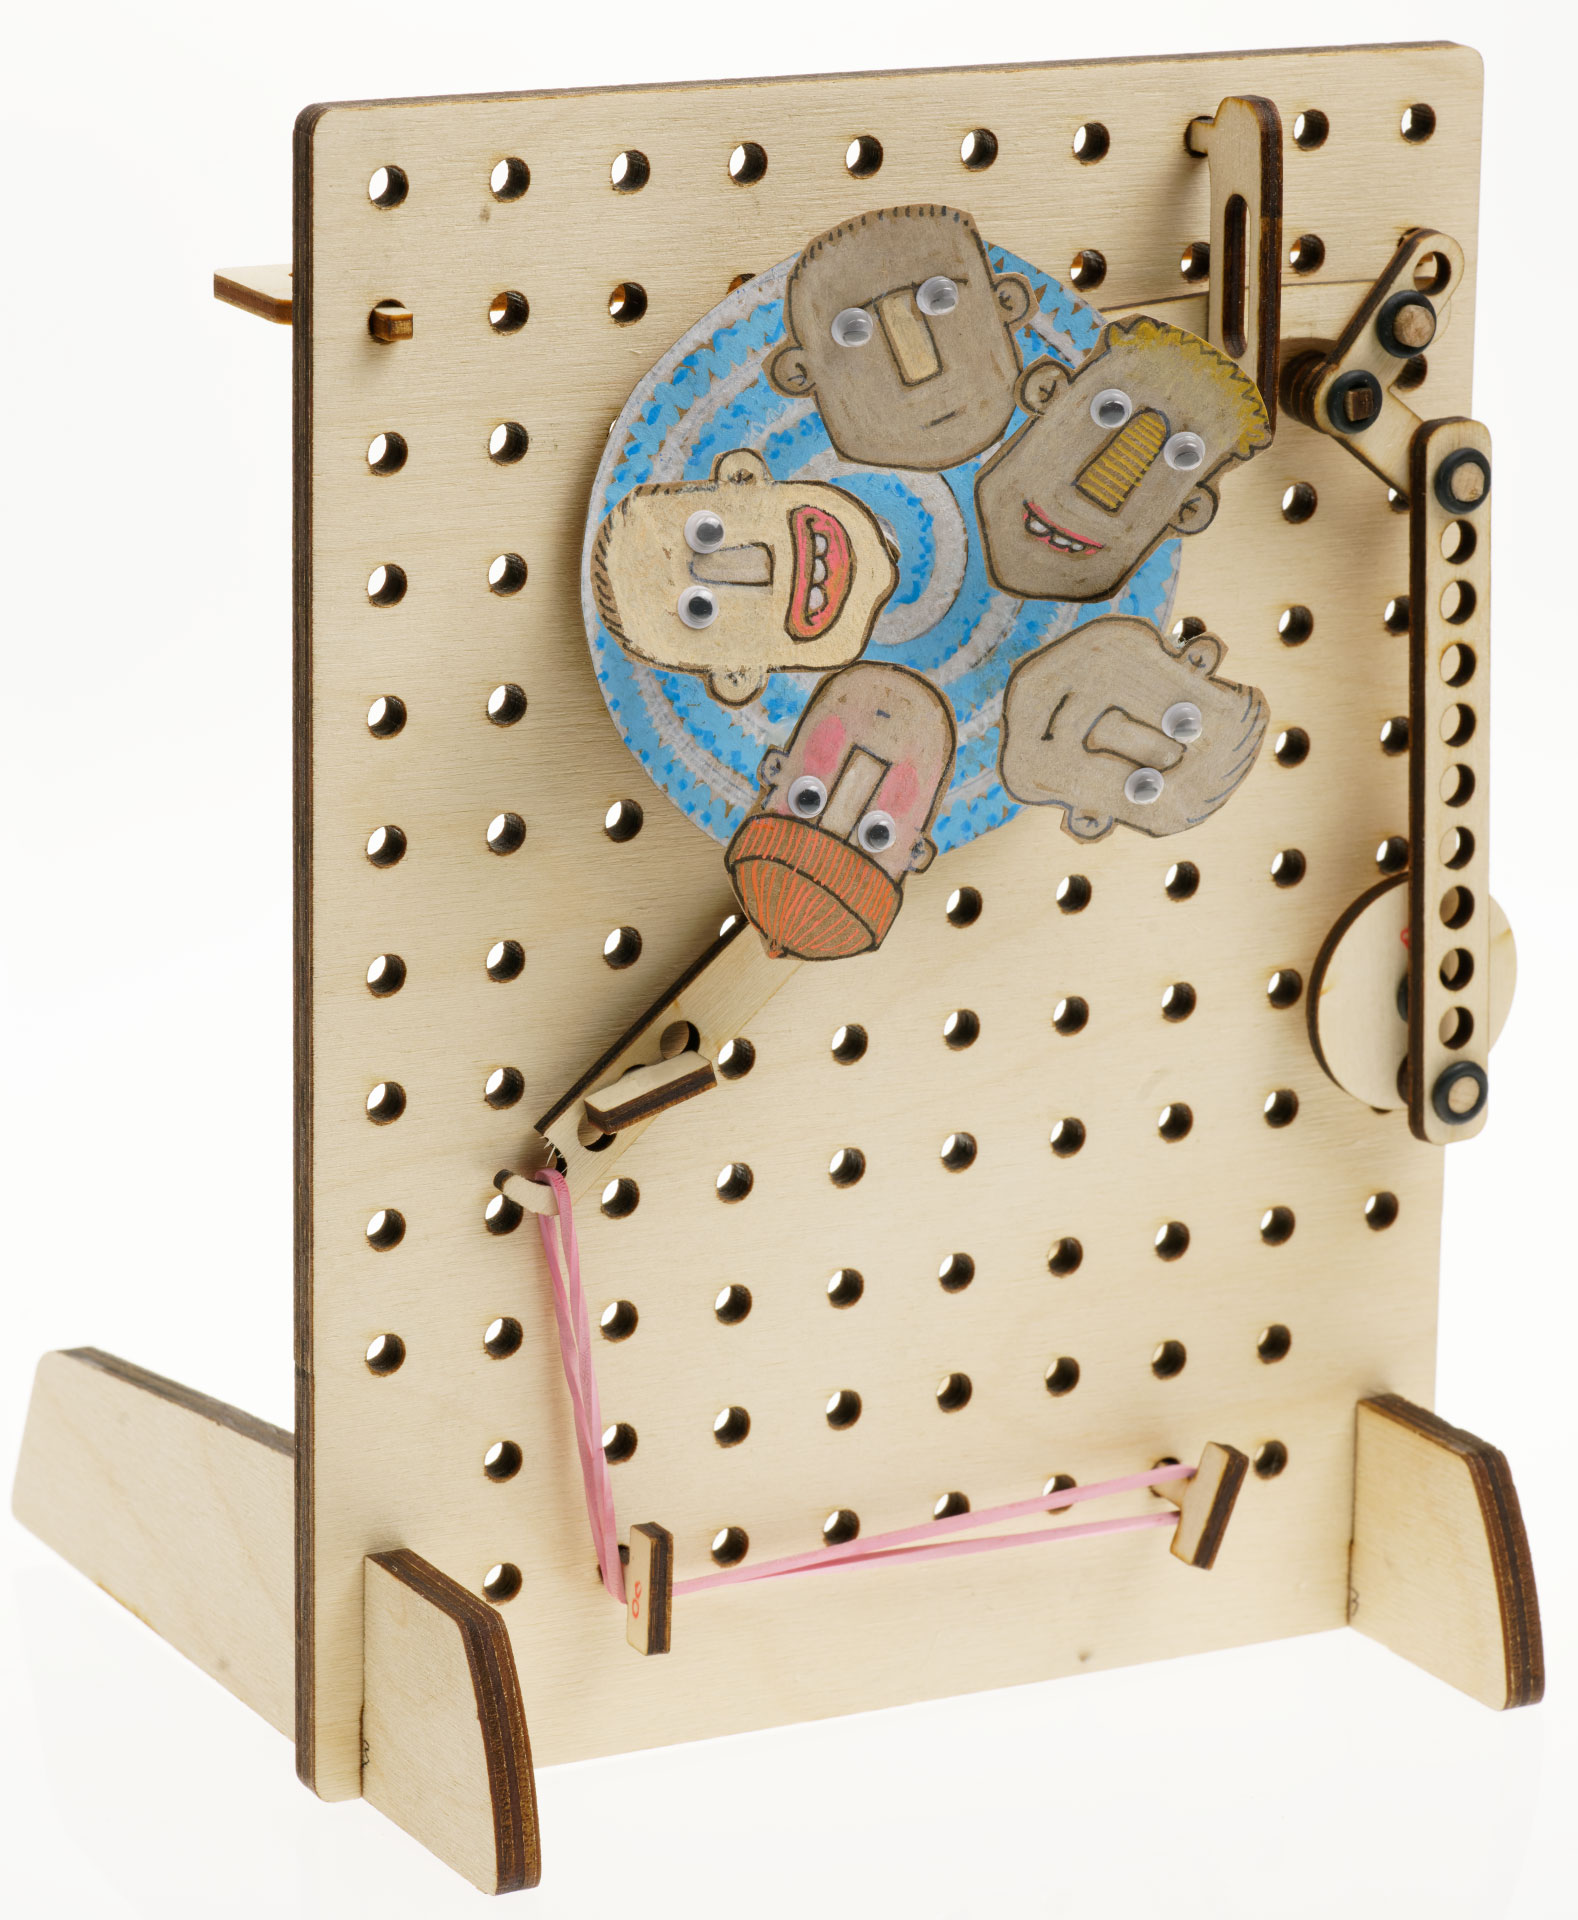 Wood pegboard with ratchet mechanism and a wheel with cartoon faces and google eyes